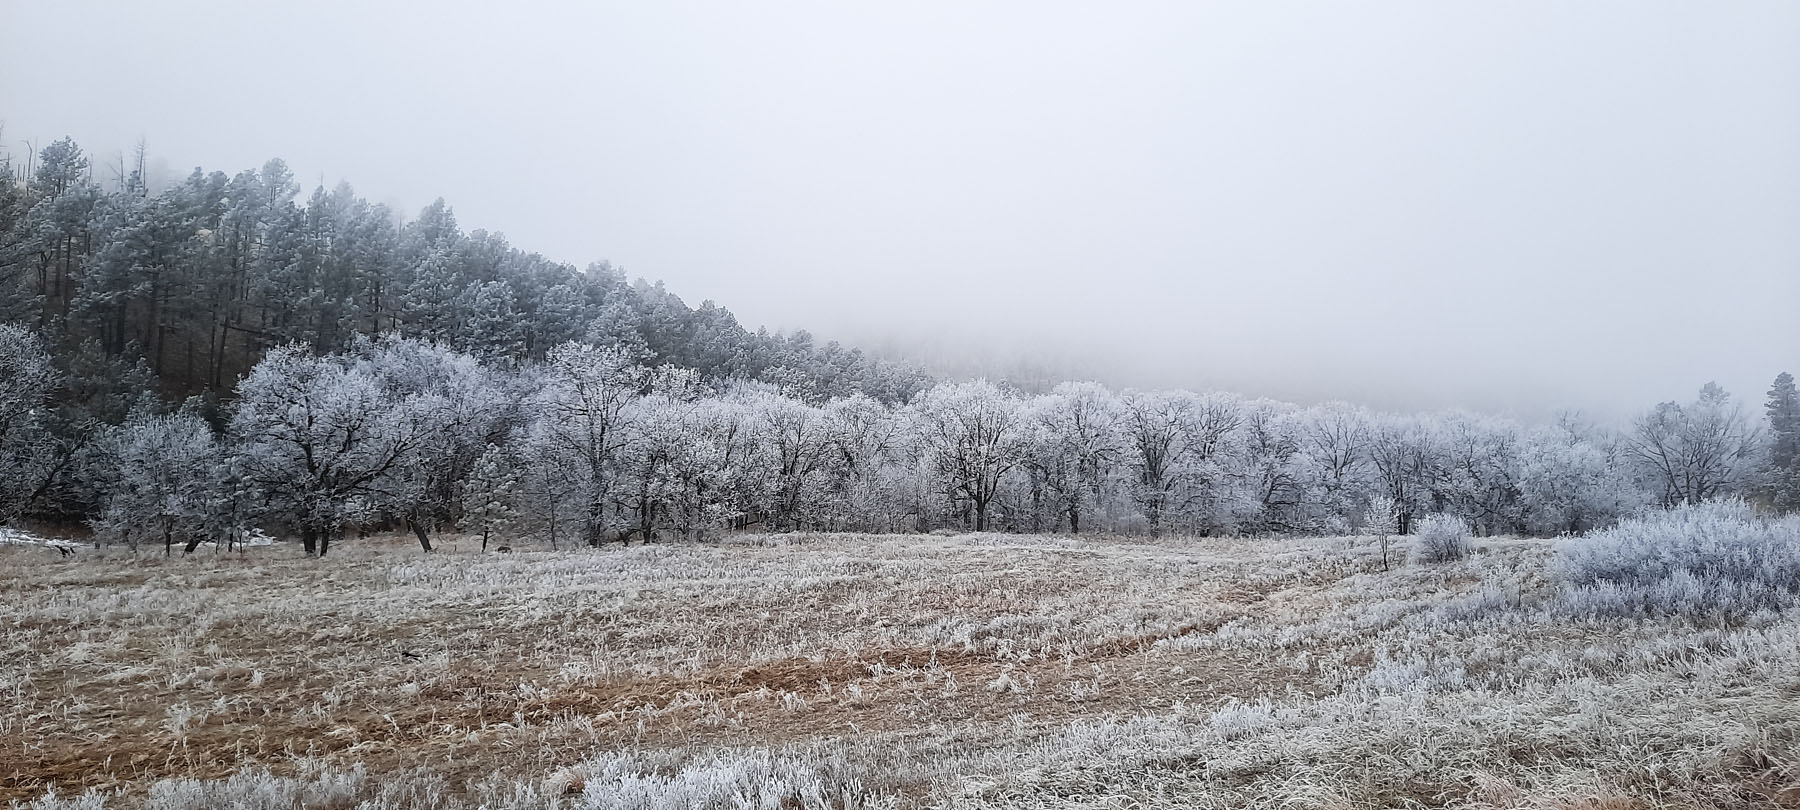 Freezing fog, Custer State Park.  Taken with my phone.  Click for next photo.